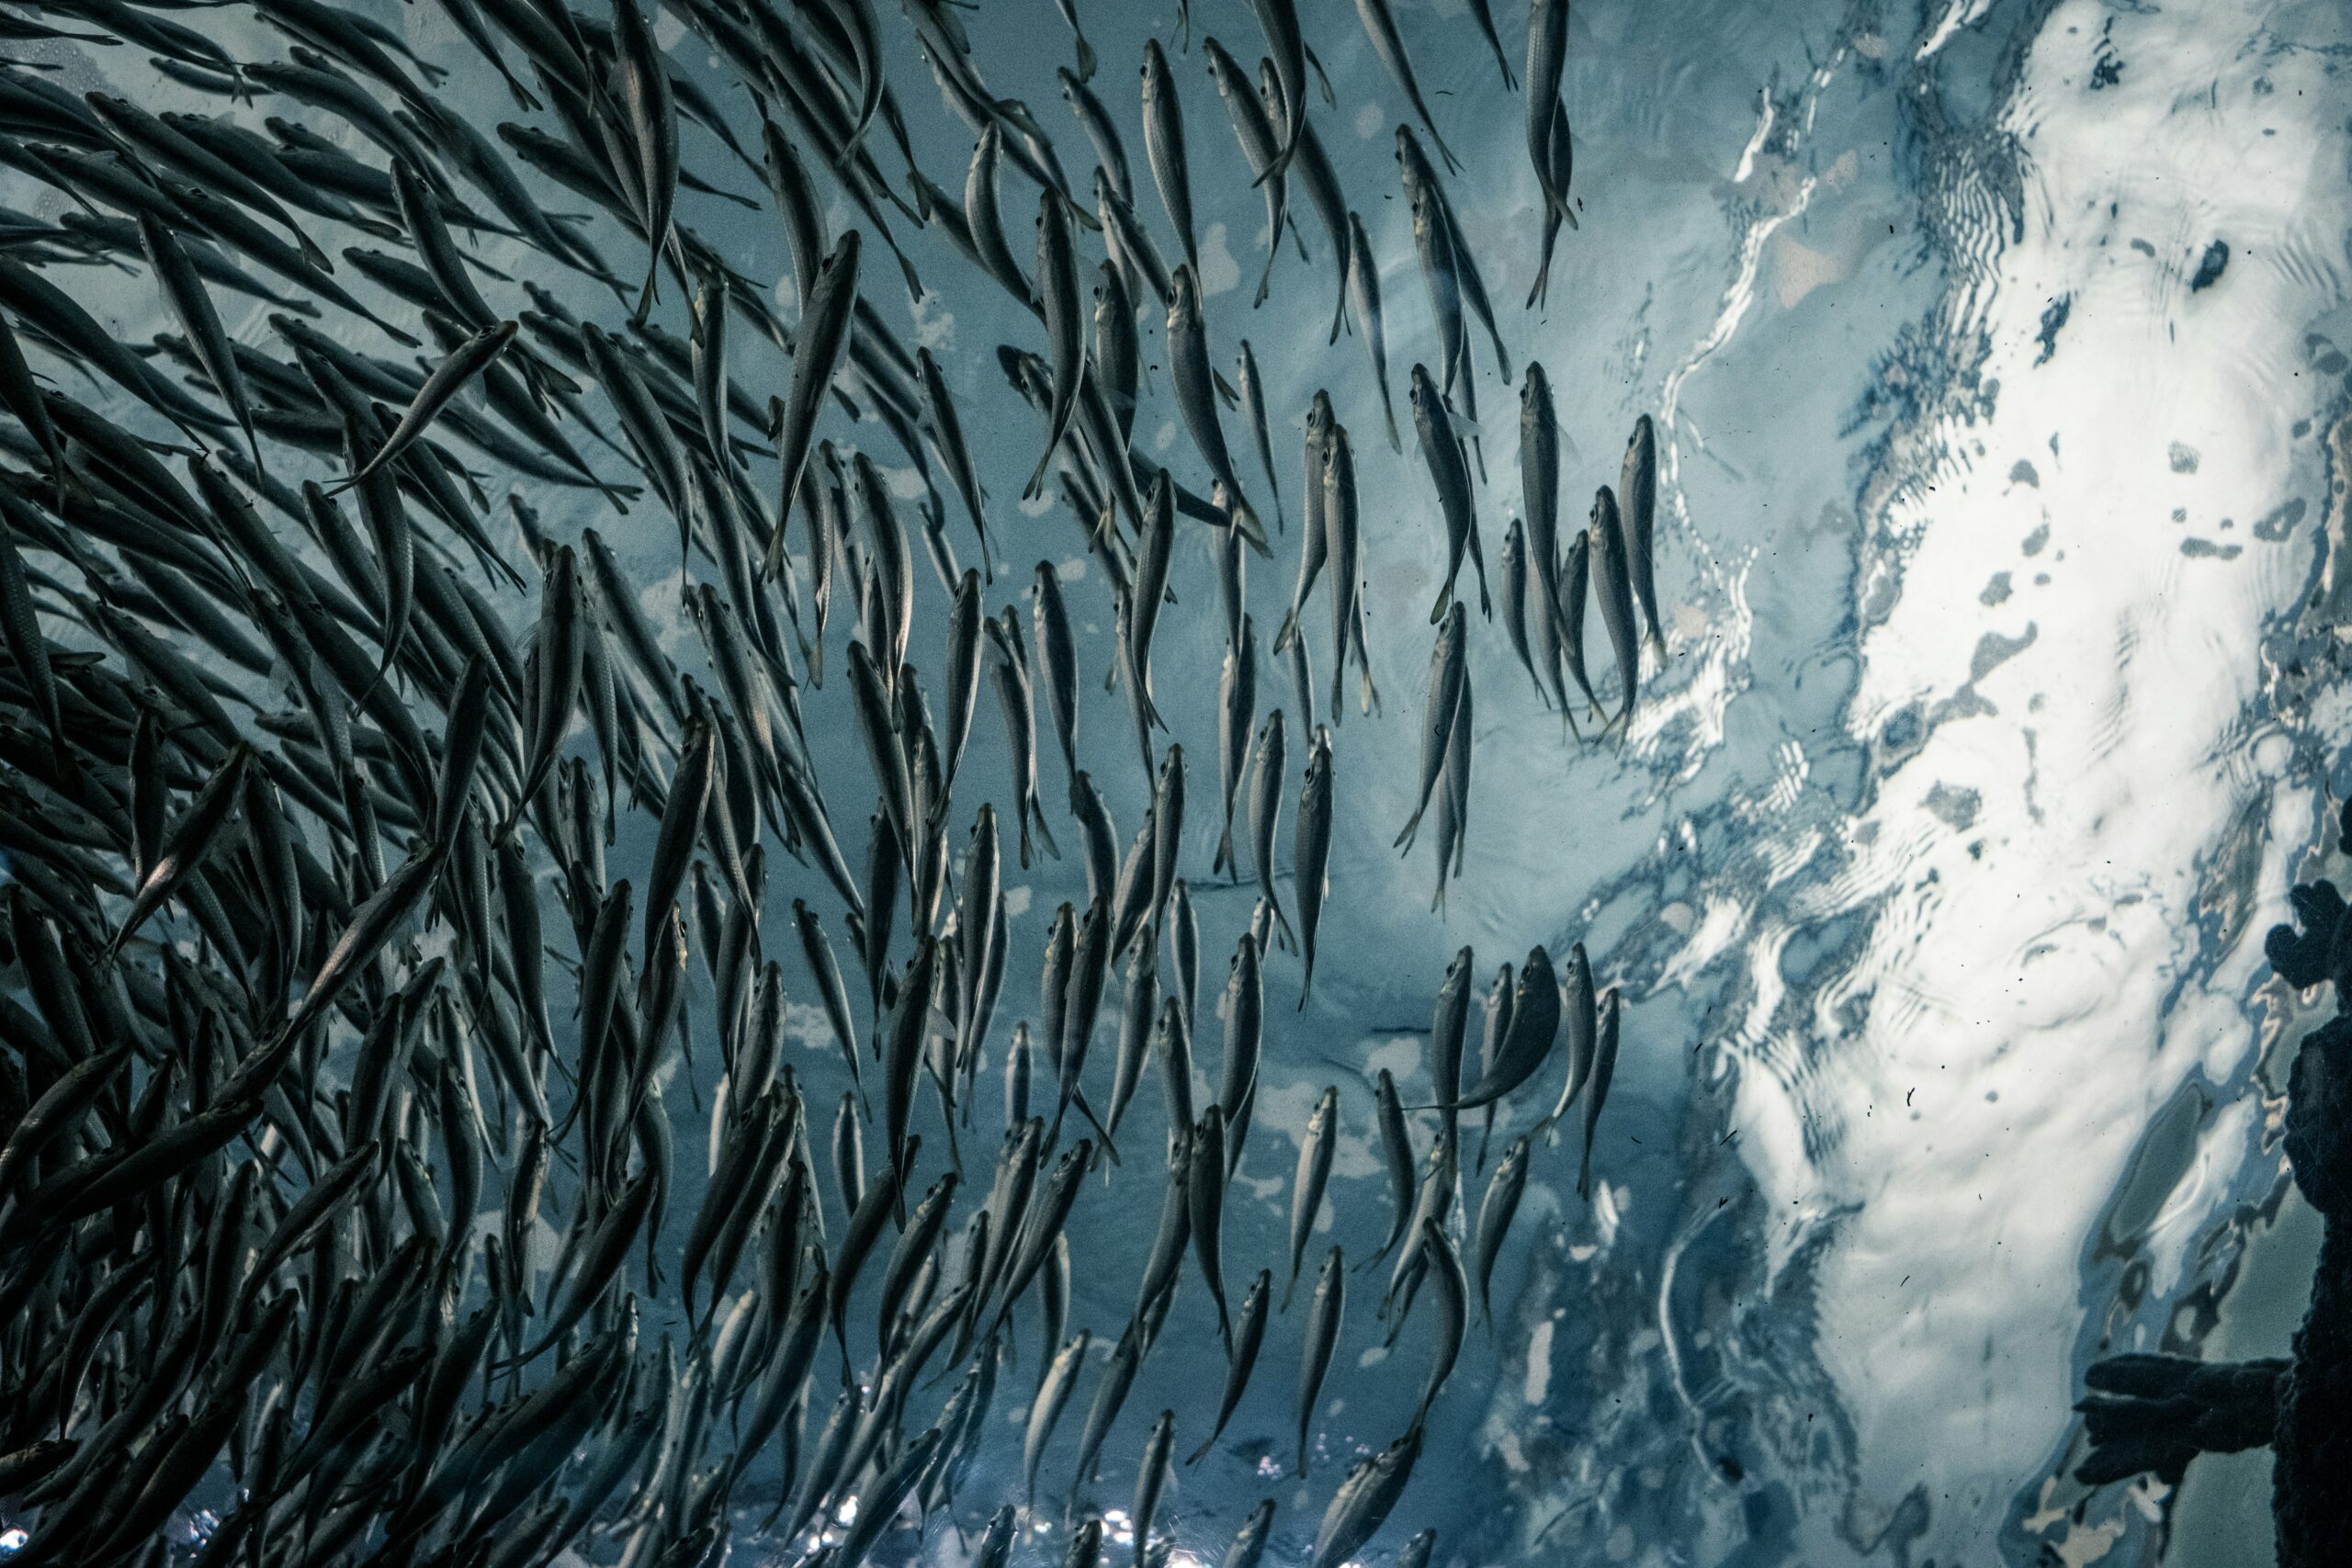 The image shows a school of fish in dark waters.